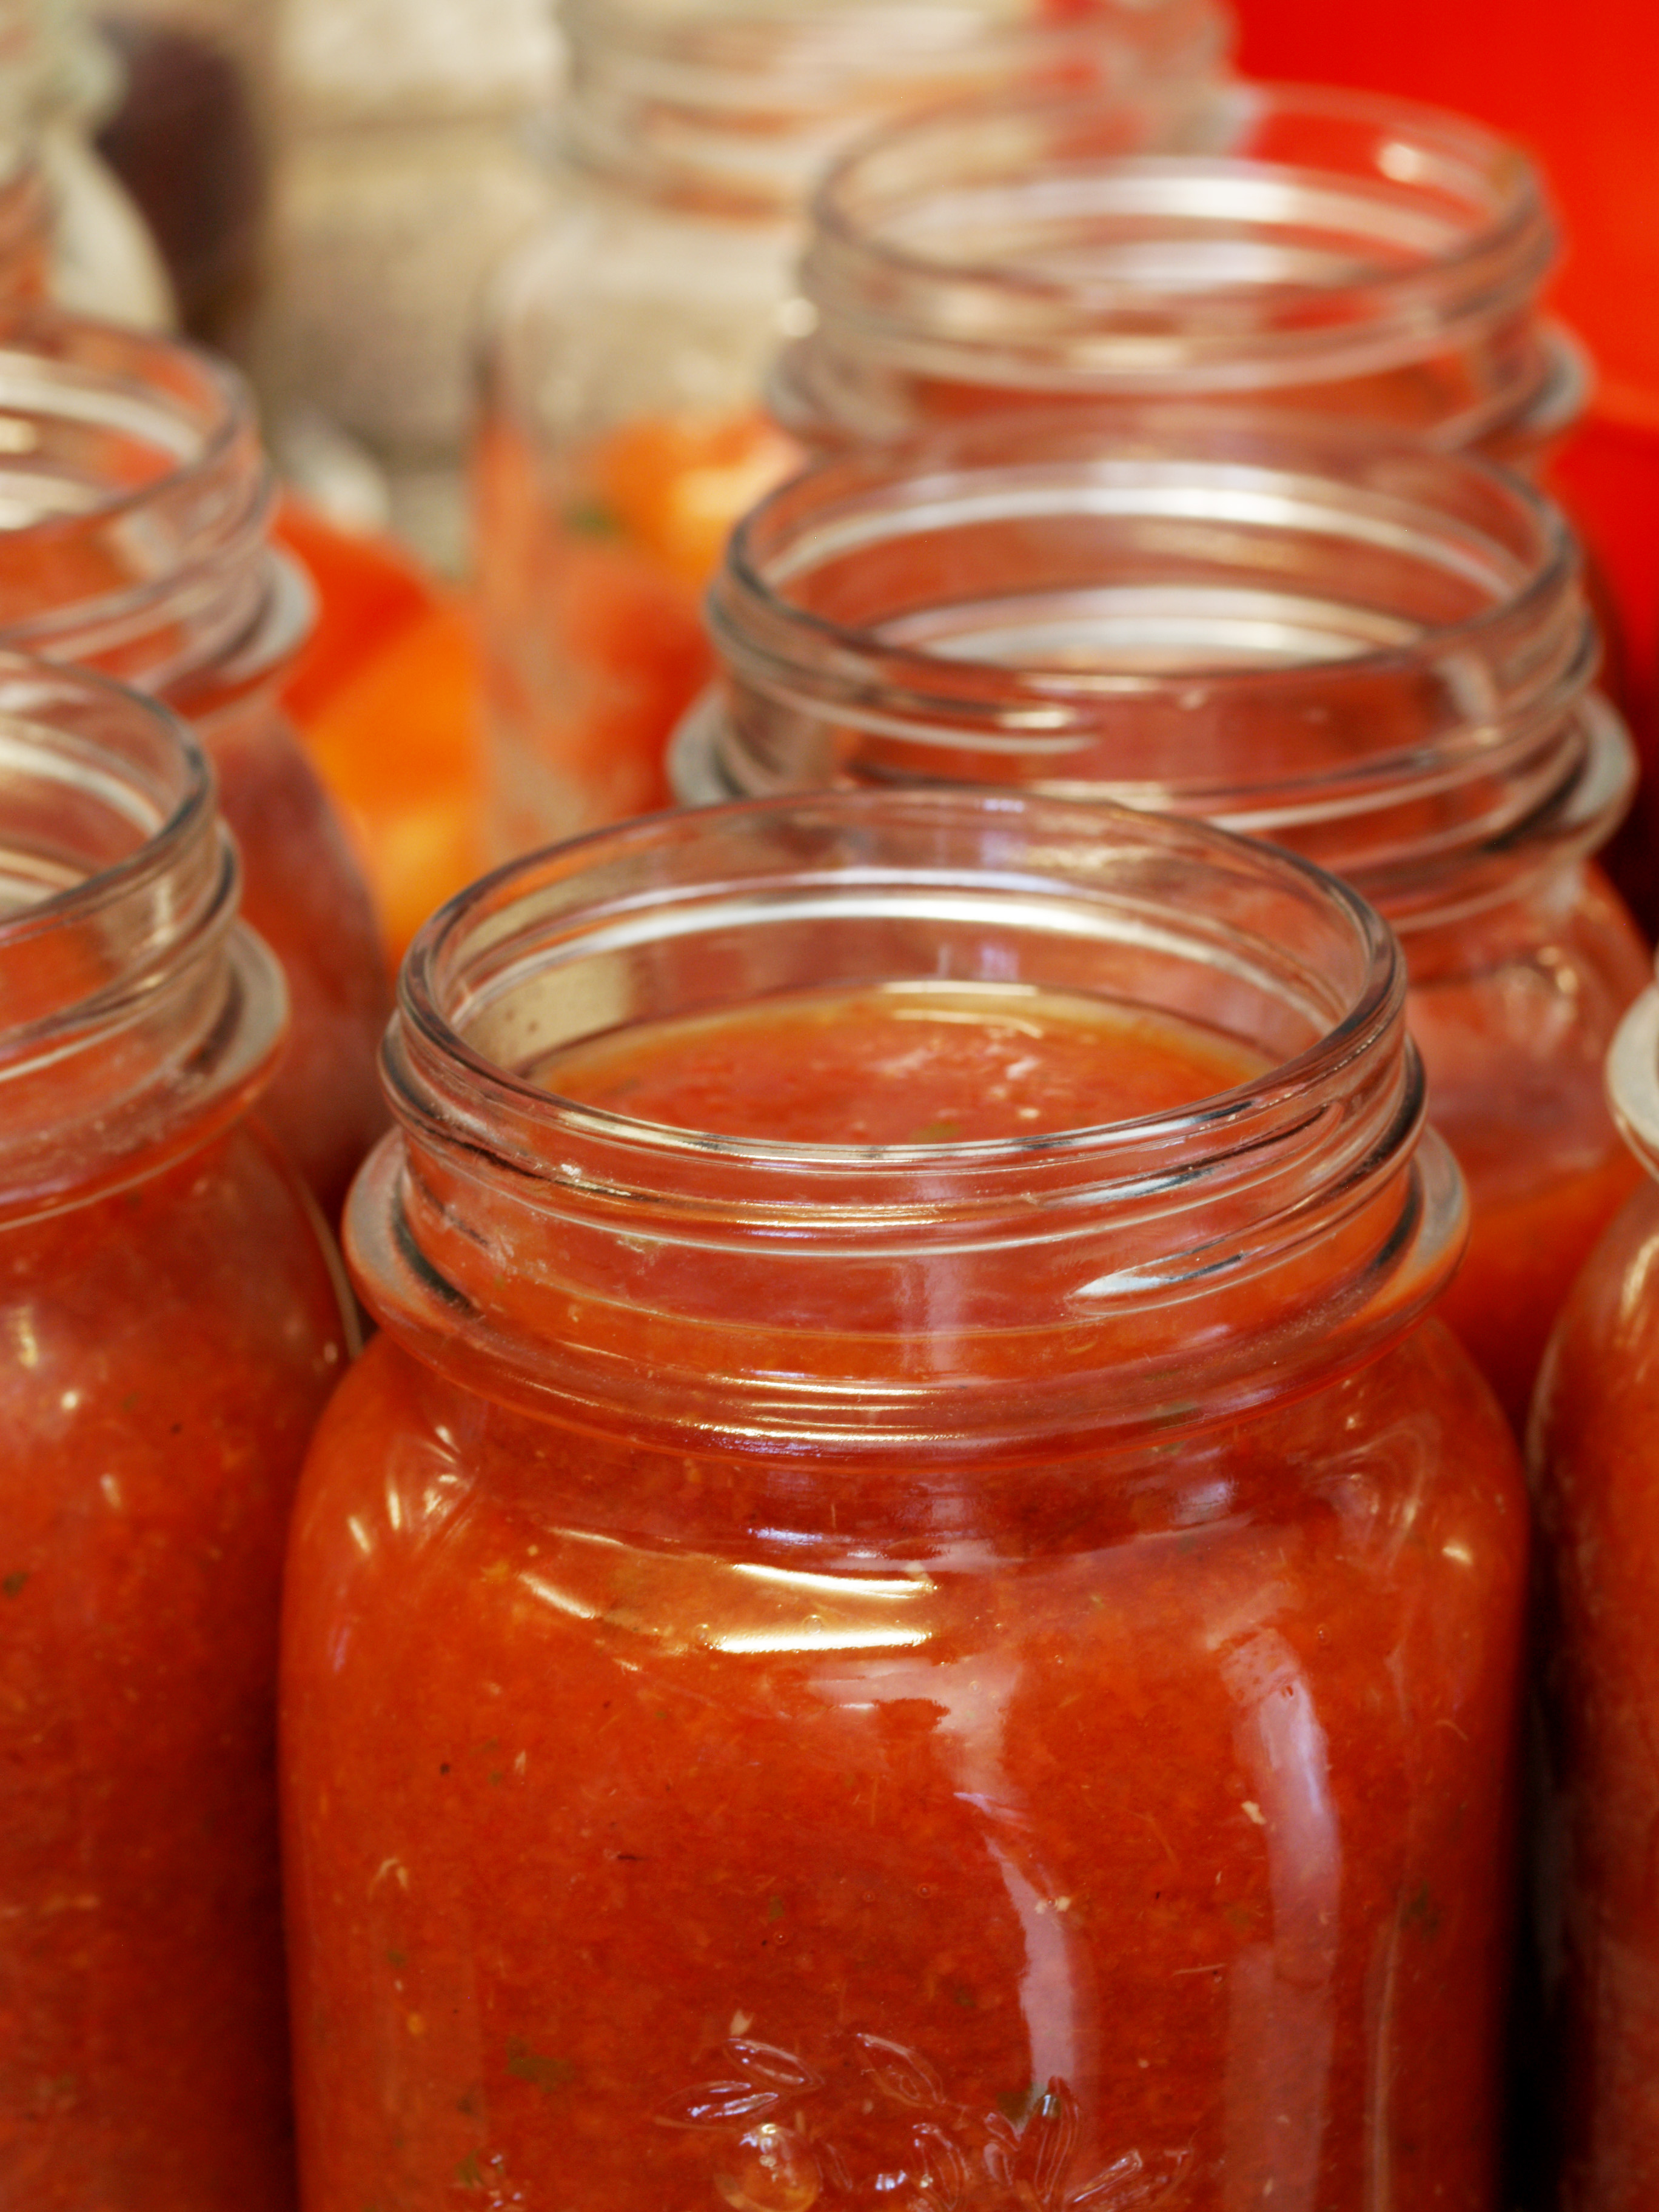 Follow research-tested recipes when canning vegetables. (NDSU photo)